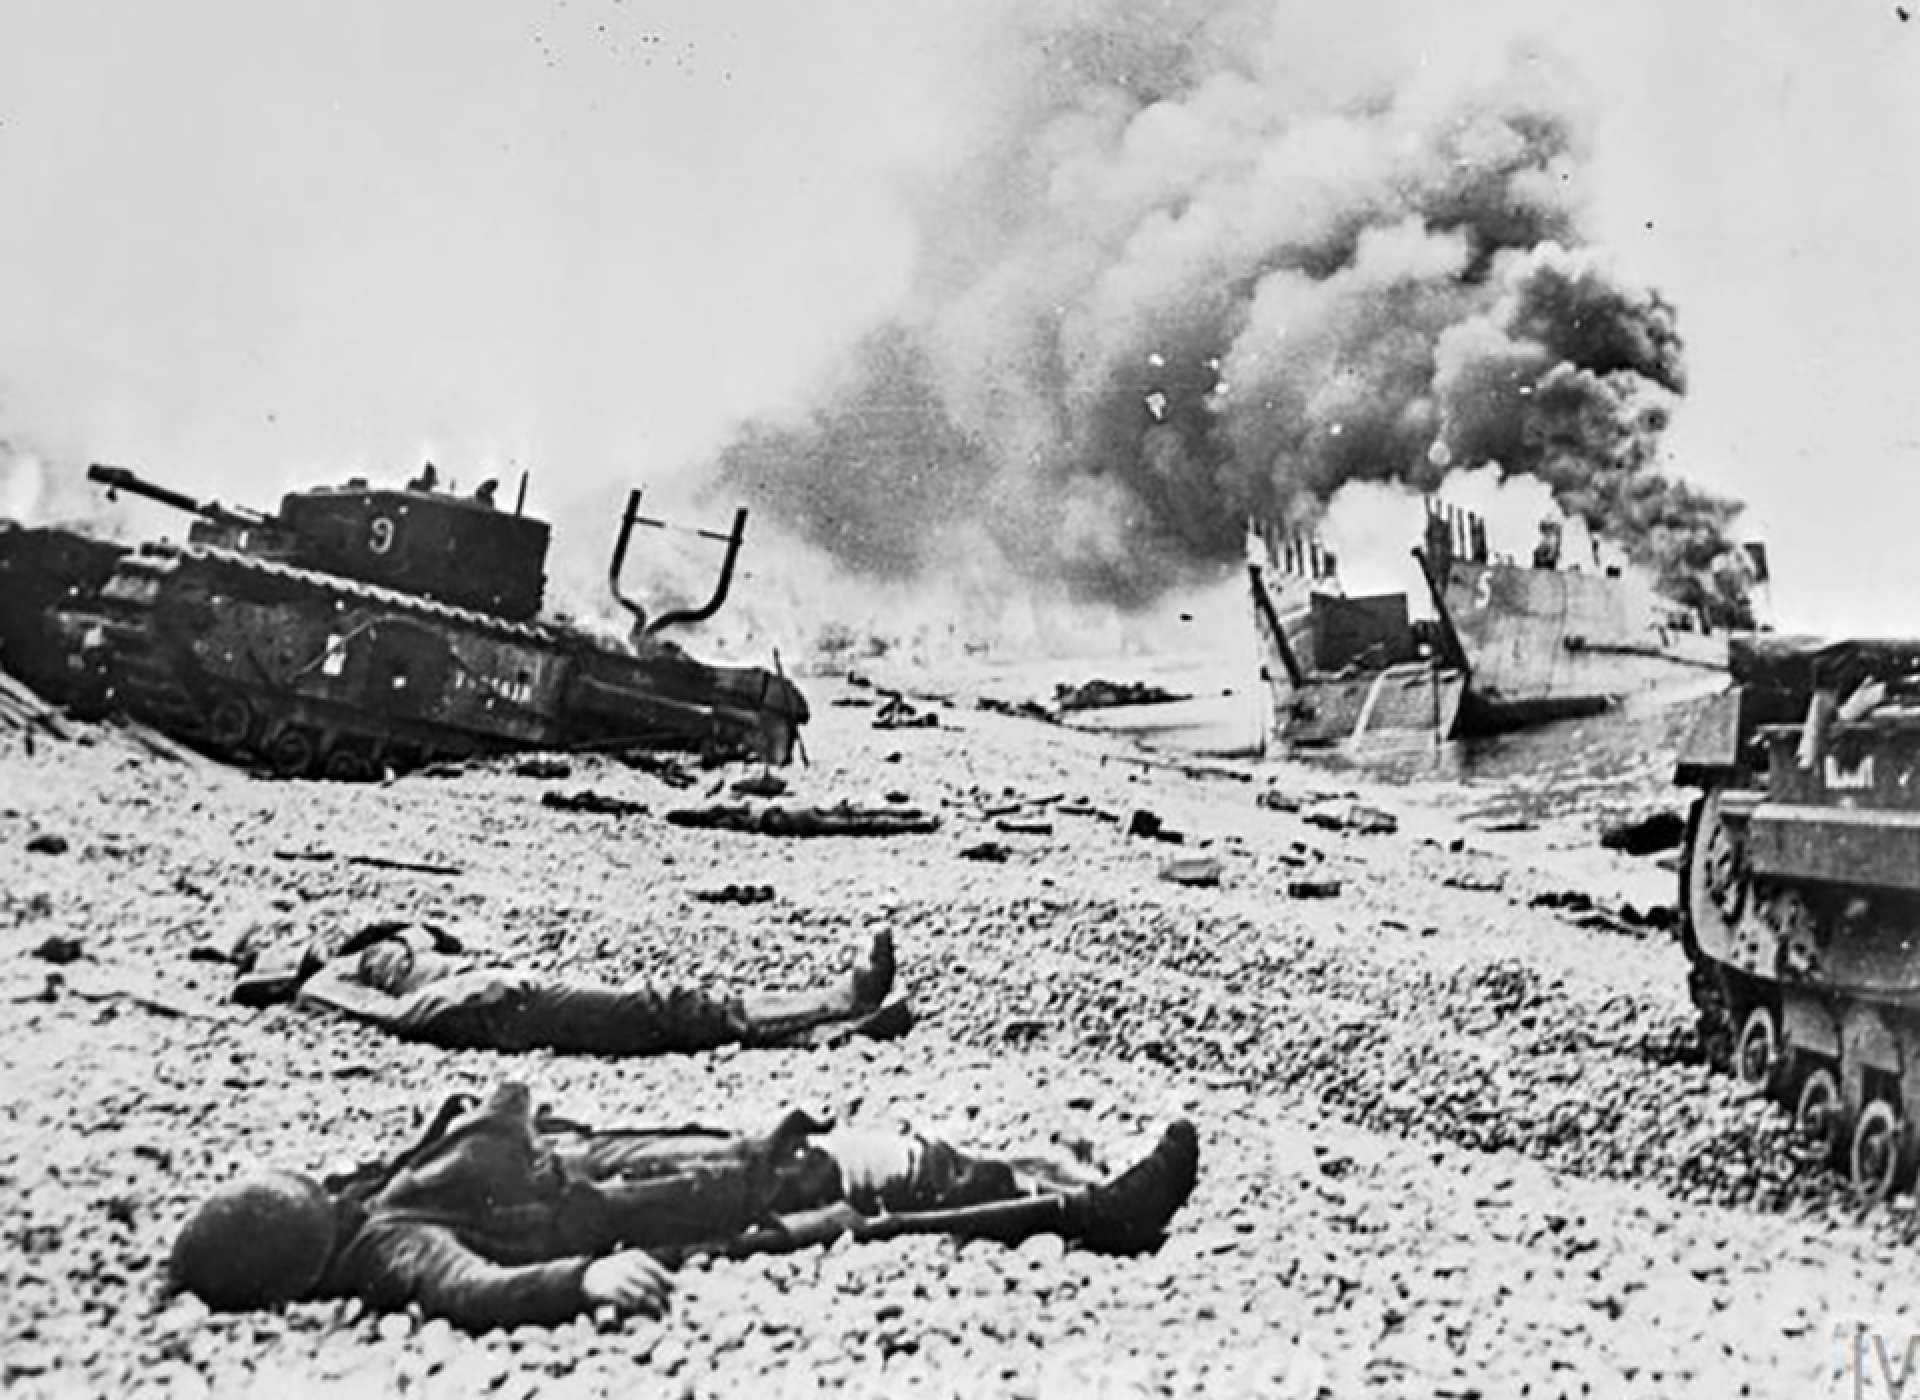 Wreckage of the landing beaches of Dieppe